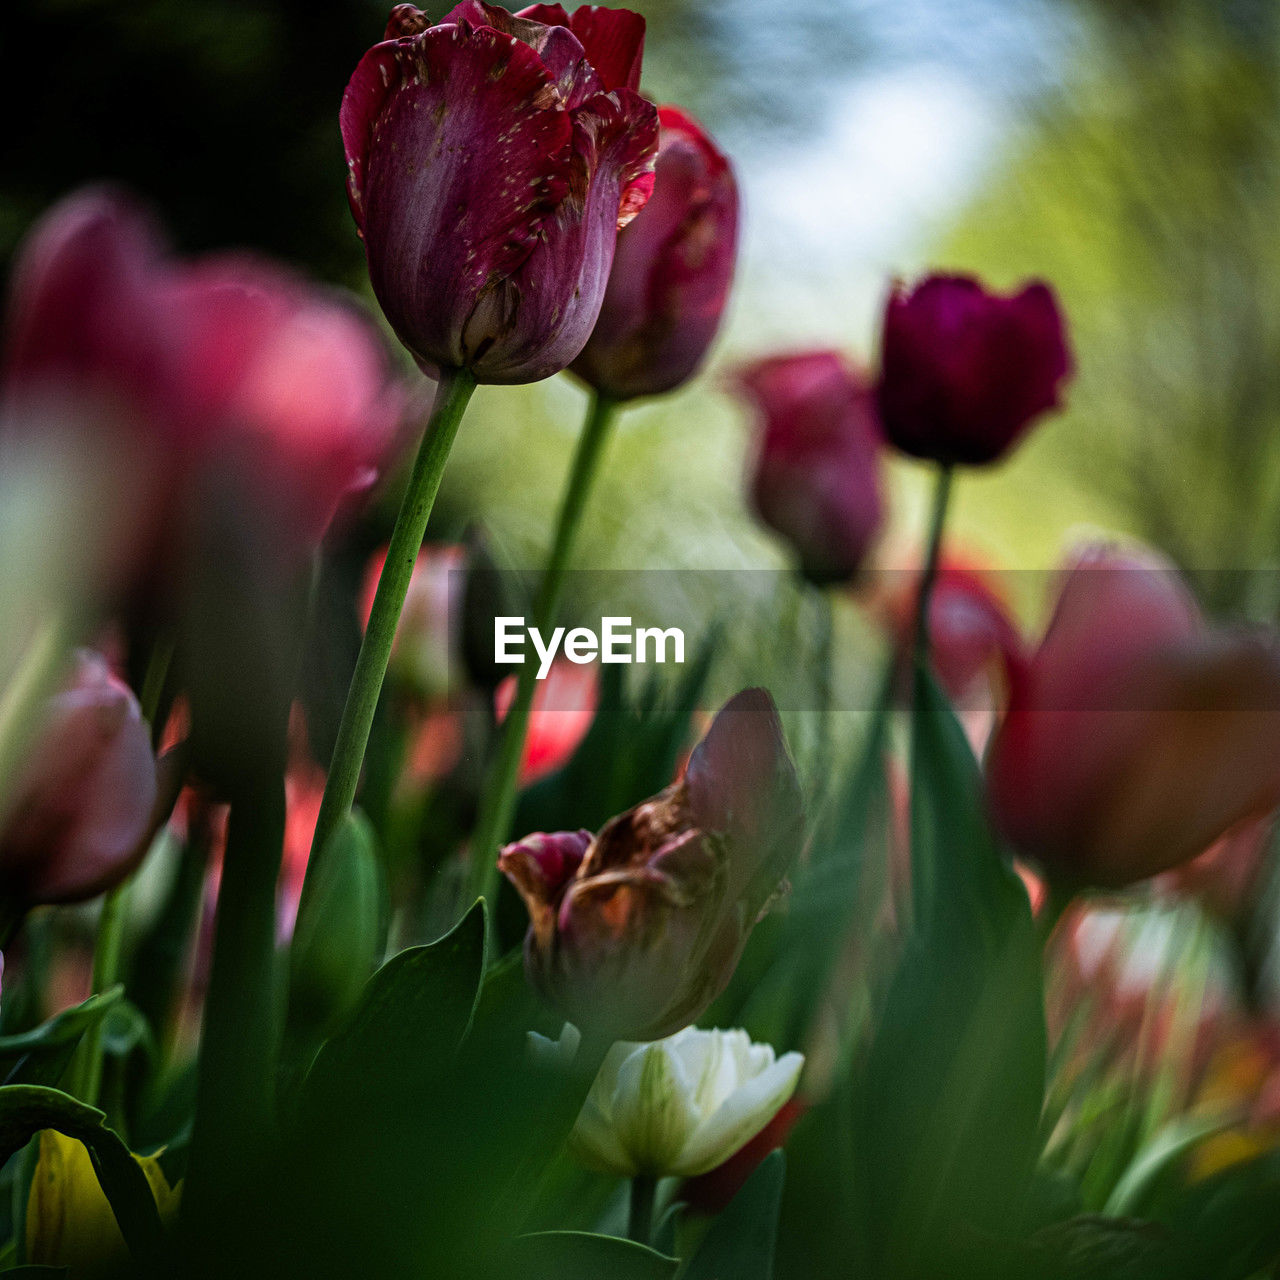 plant, flower, flowering plant, beauty in nature, freshness, nature, petal, close-up, macro photography, blossom, growth, red, no people, selective focus, plant part, fragility, leaf, pink, outdoors, flower head, green, springtime, multi colored, environment, summer, bud, inflorescence, tulip, focus on foreground, botany, day, land, magenta